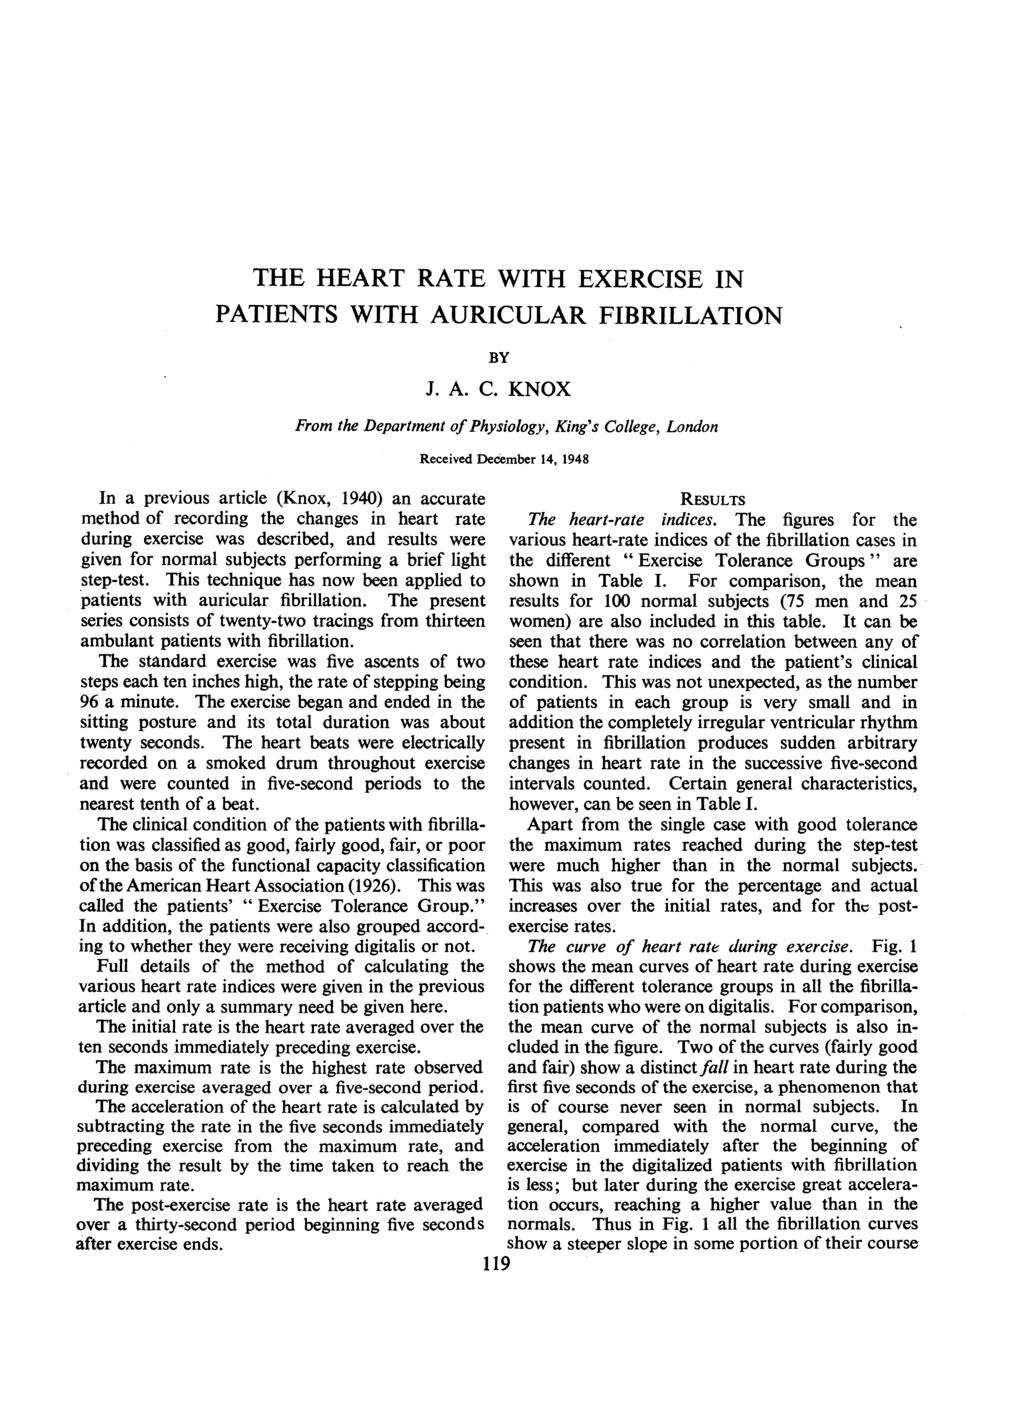 THE HEART RATE WTH EXERCSE N PATENTS WTH AURCULAR FBRLLATON BY n a previous article (Knox, 1940) an accurate method of recording the changes in heart rate during exercise was described, and results